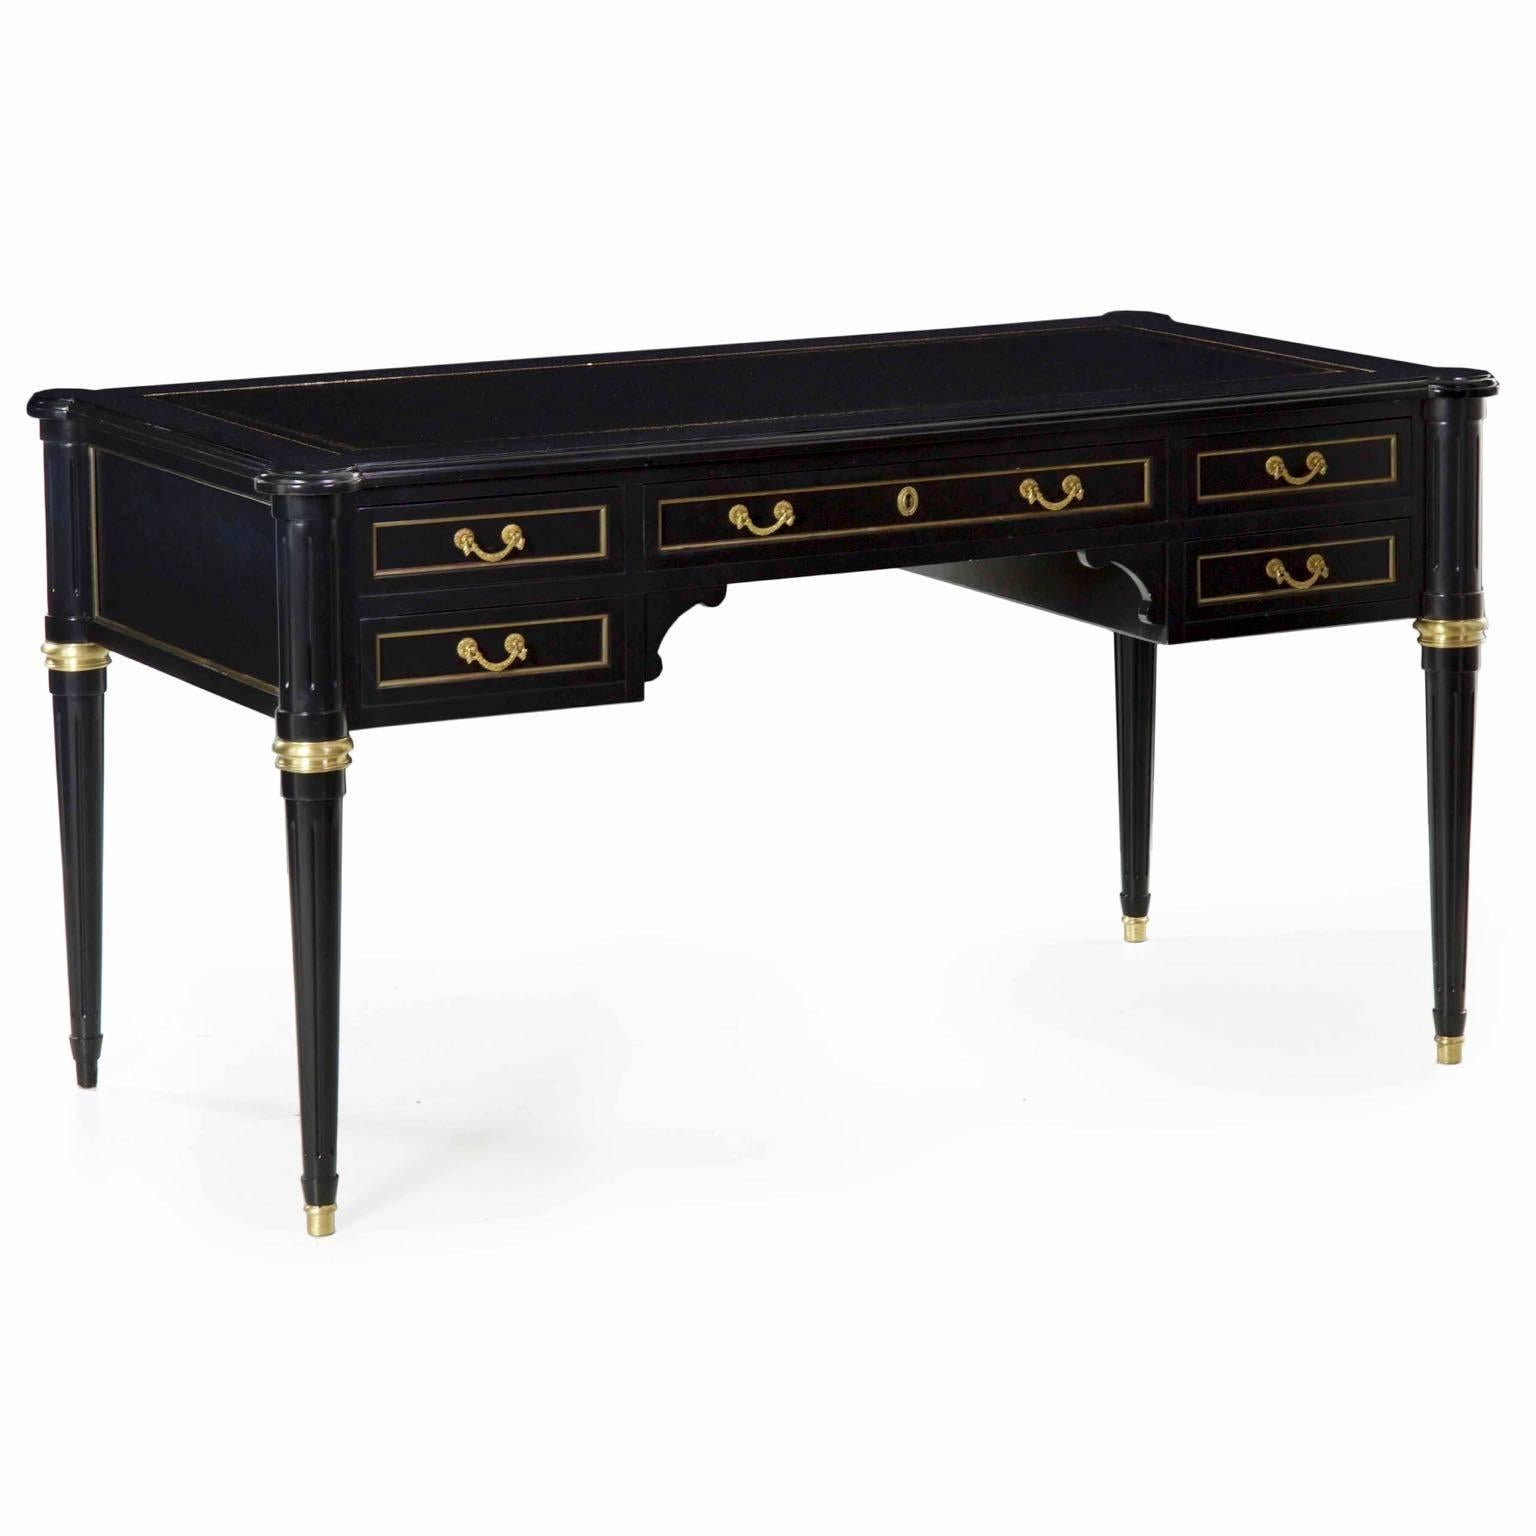 An attractive writing desk in the Louis XVI taste, this piece was likely crafted in the last thirty years or thereabouts and remains in excellent condition throughout. The black lacquer surface contrasts beautifully against the brass rings, sabots